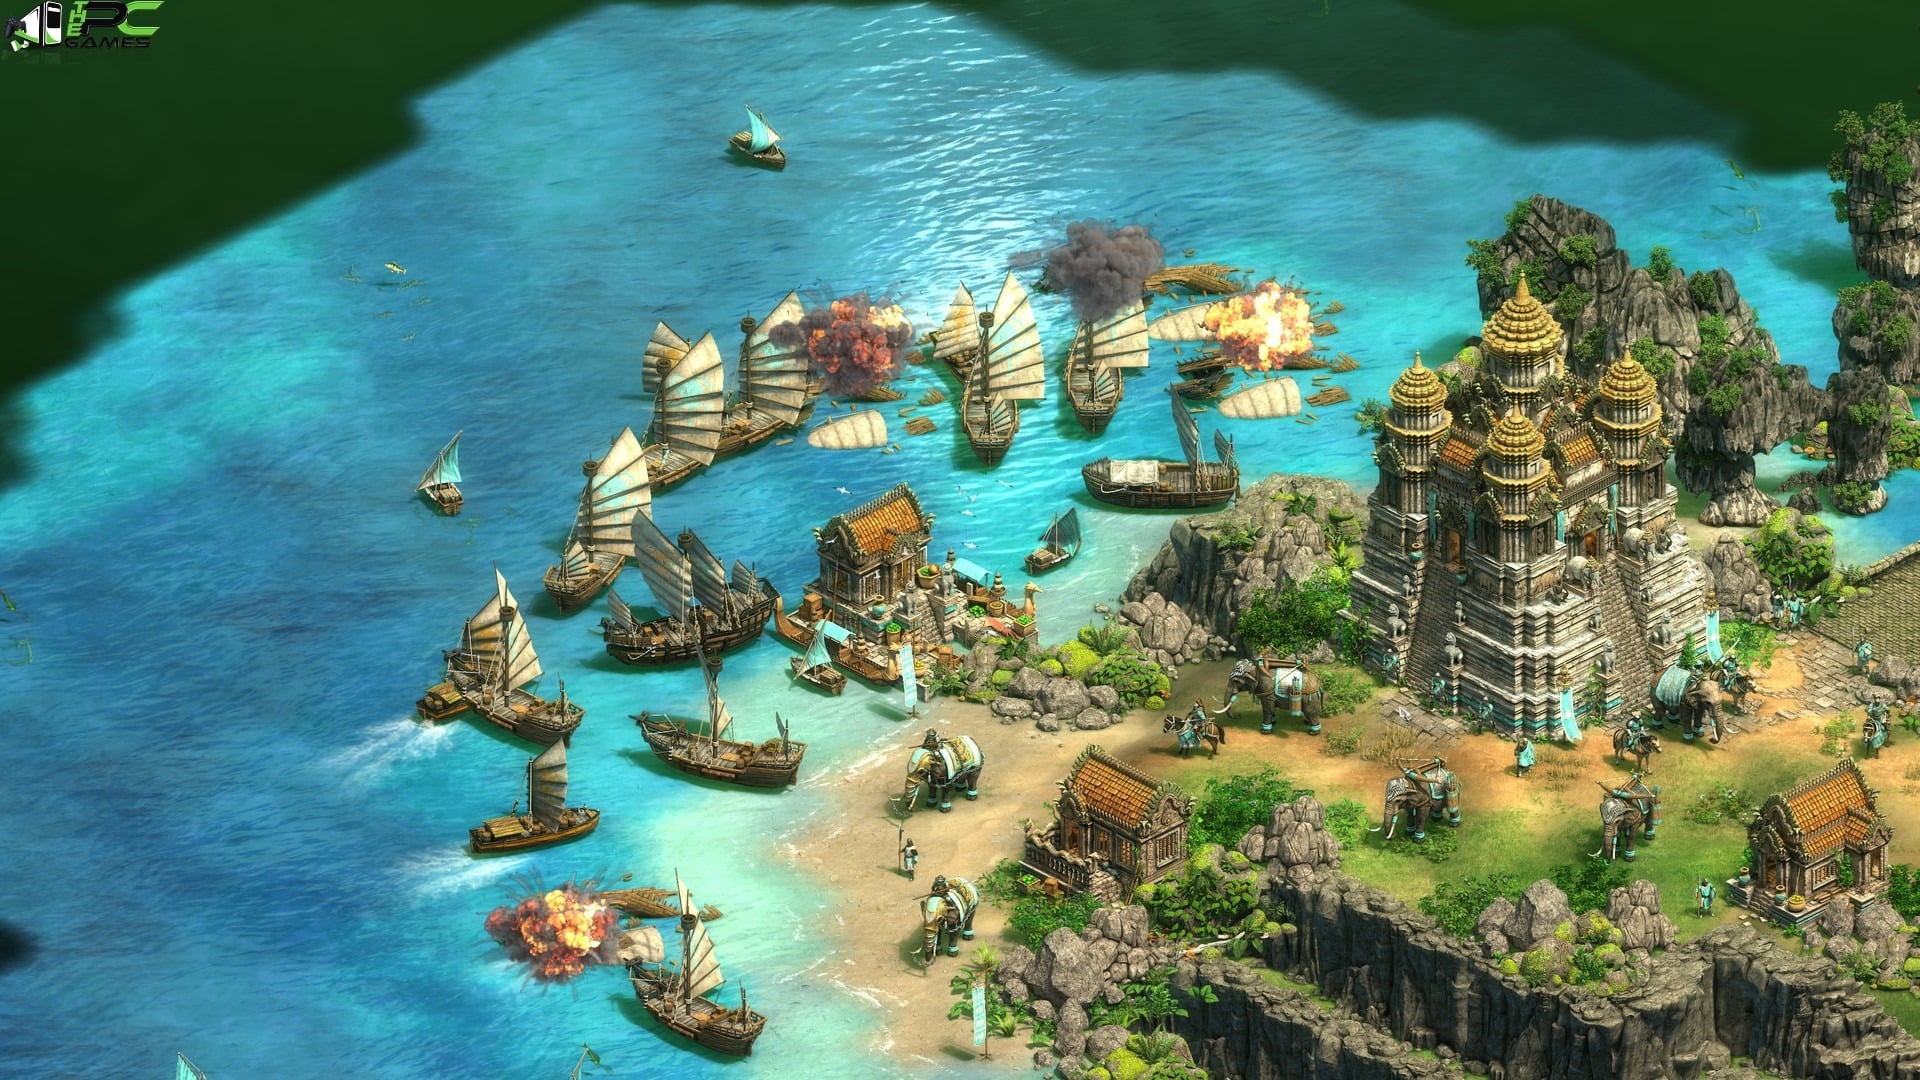 Age of Empires II Definitive Edition Screenshot 3